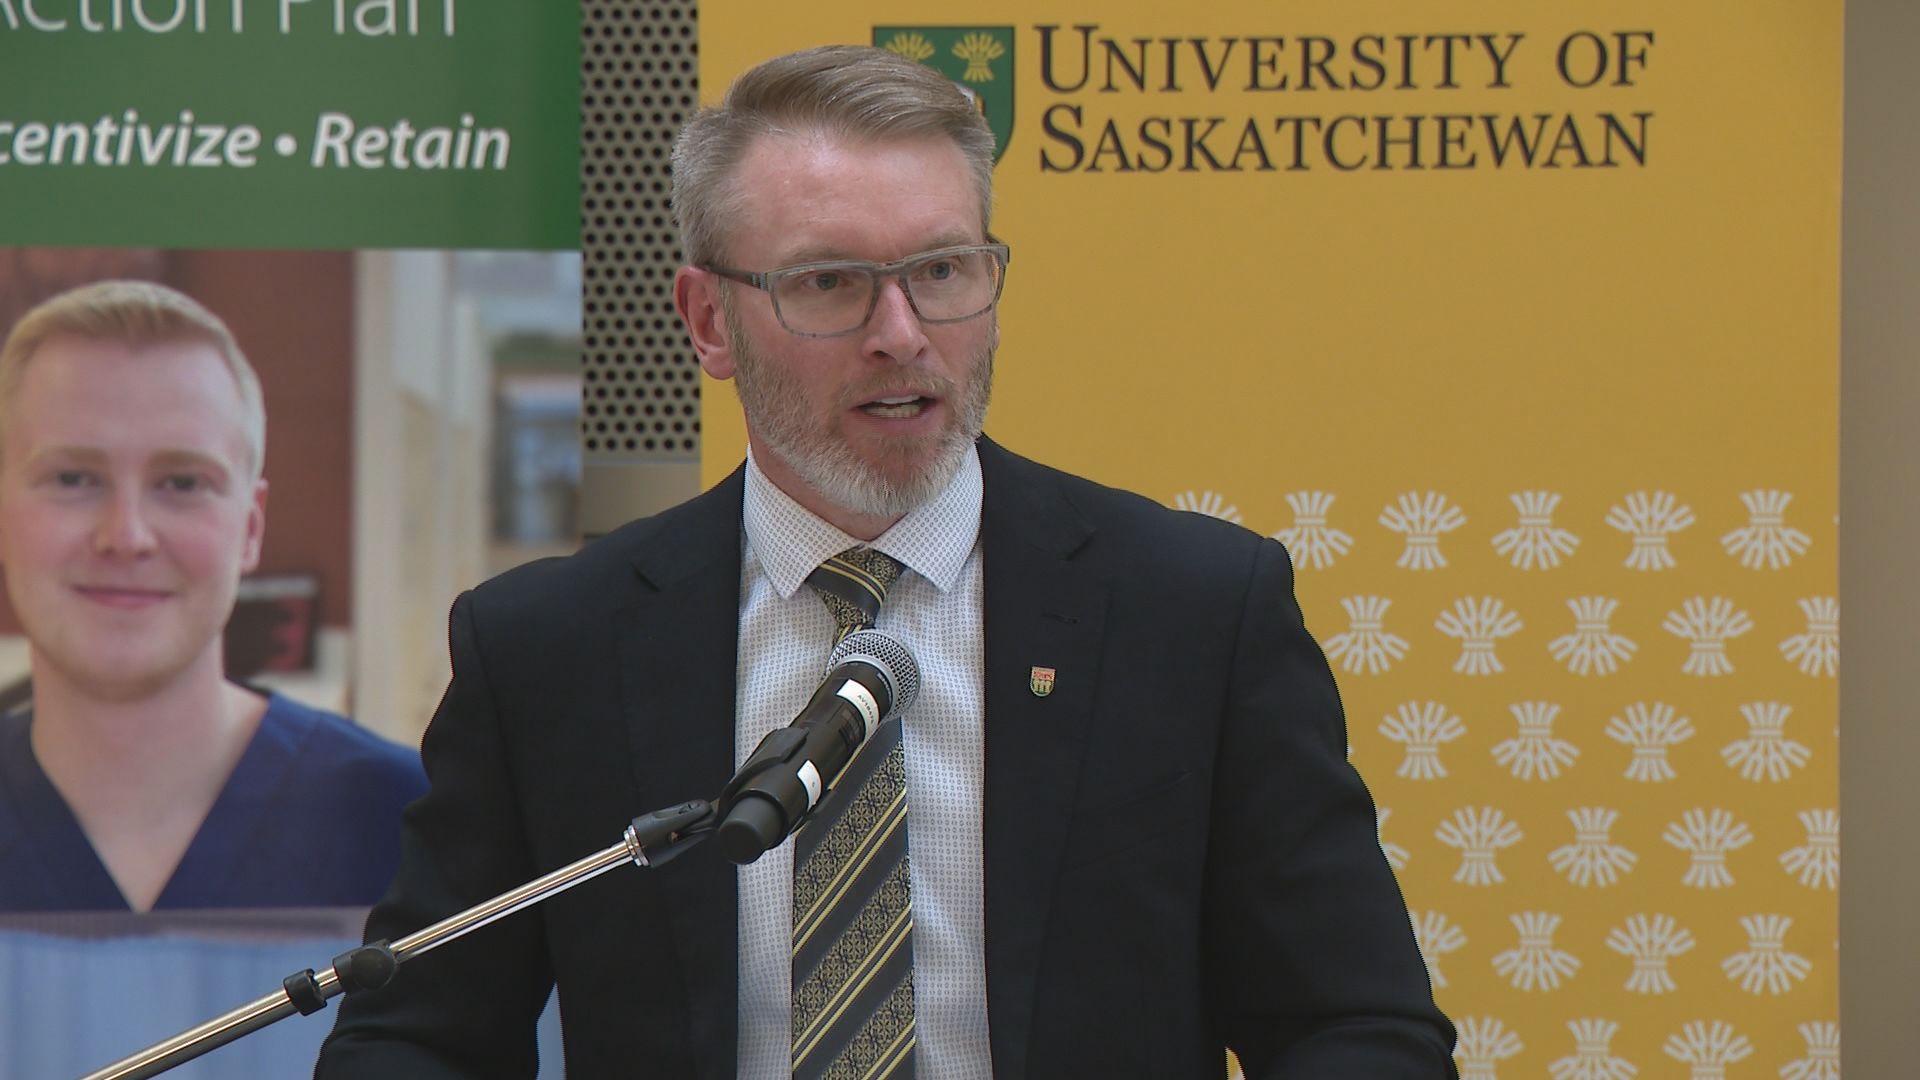 Occupational therapy, speech language pathology programs coming to U of S